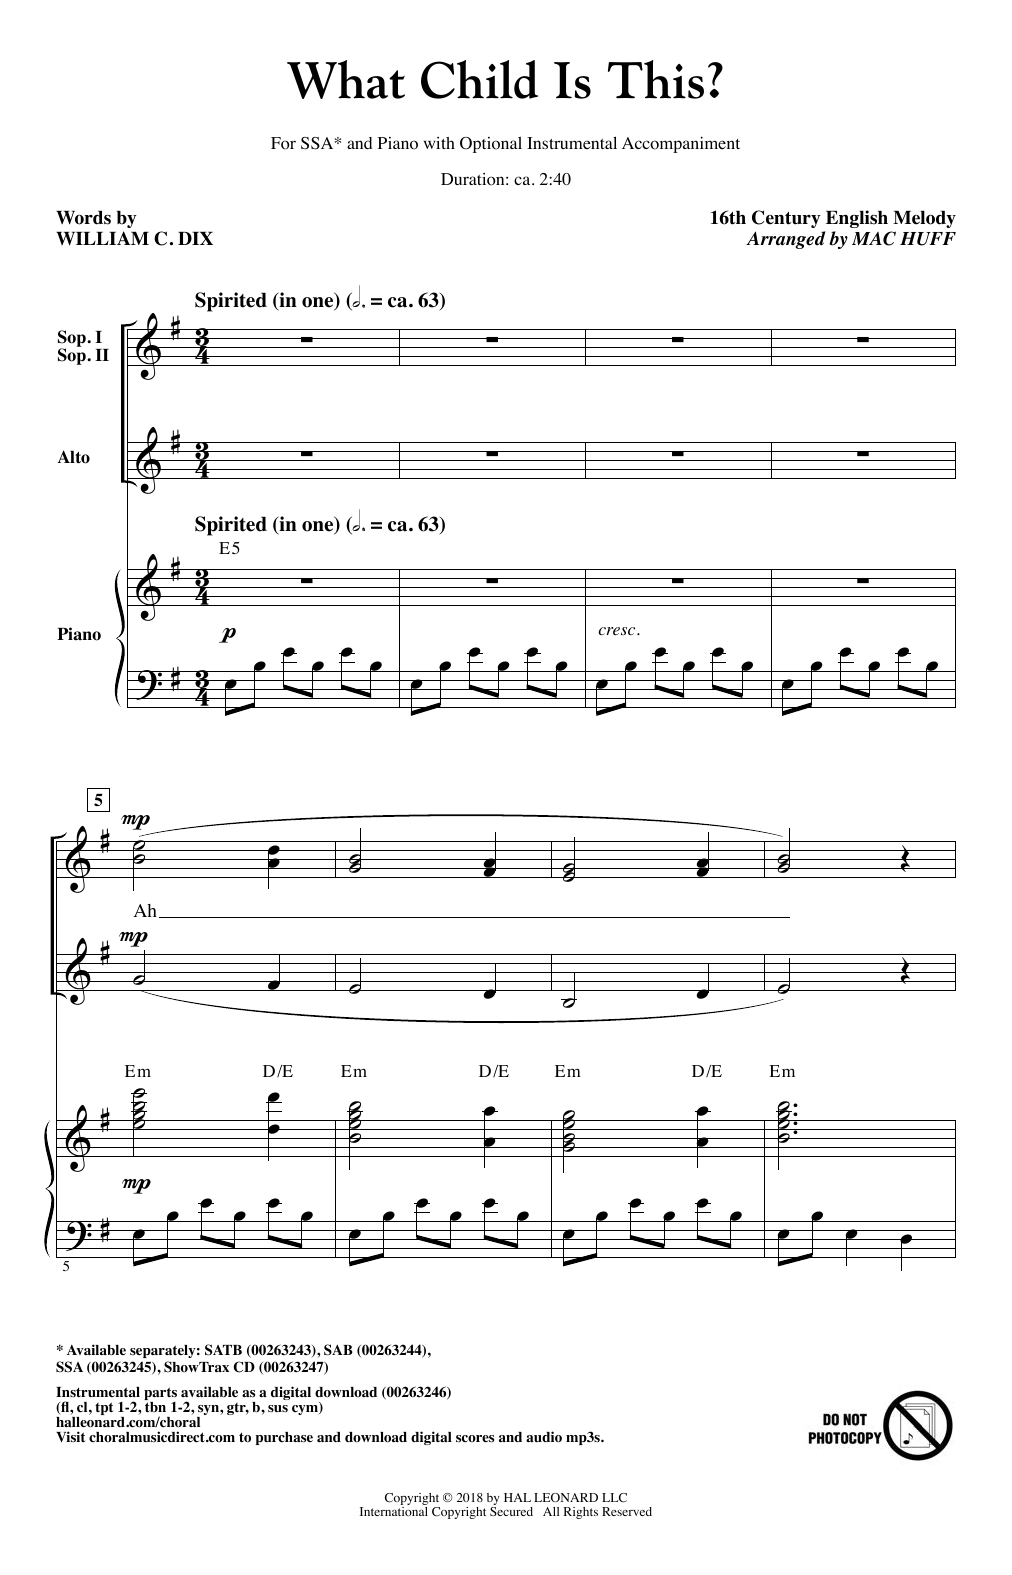 Download Mac Huff What Child Is This? Sheet Music